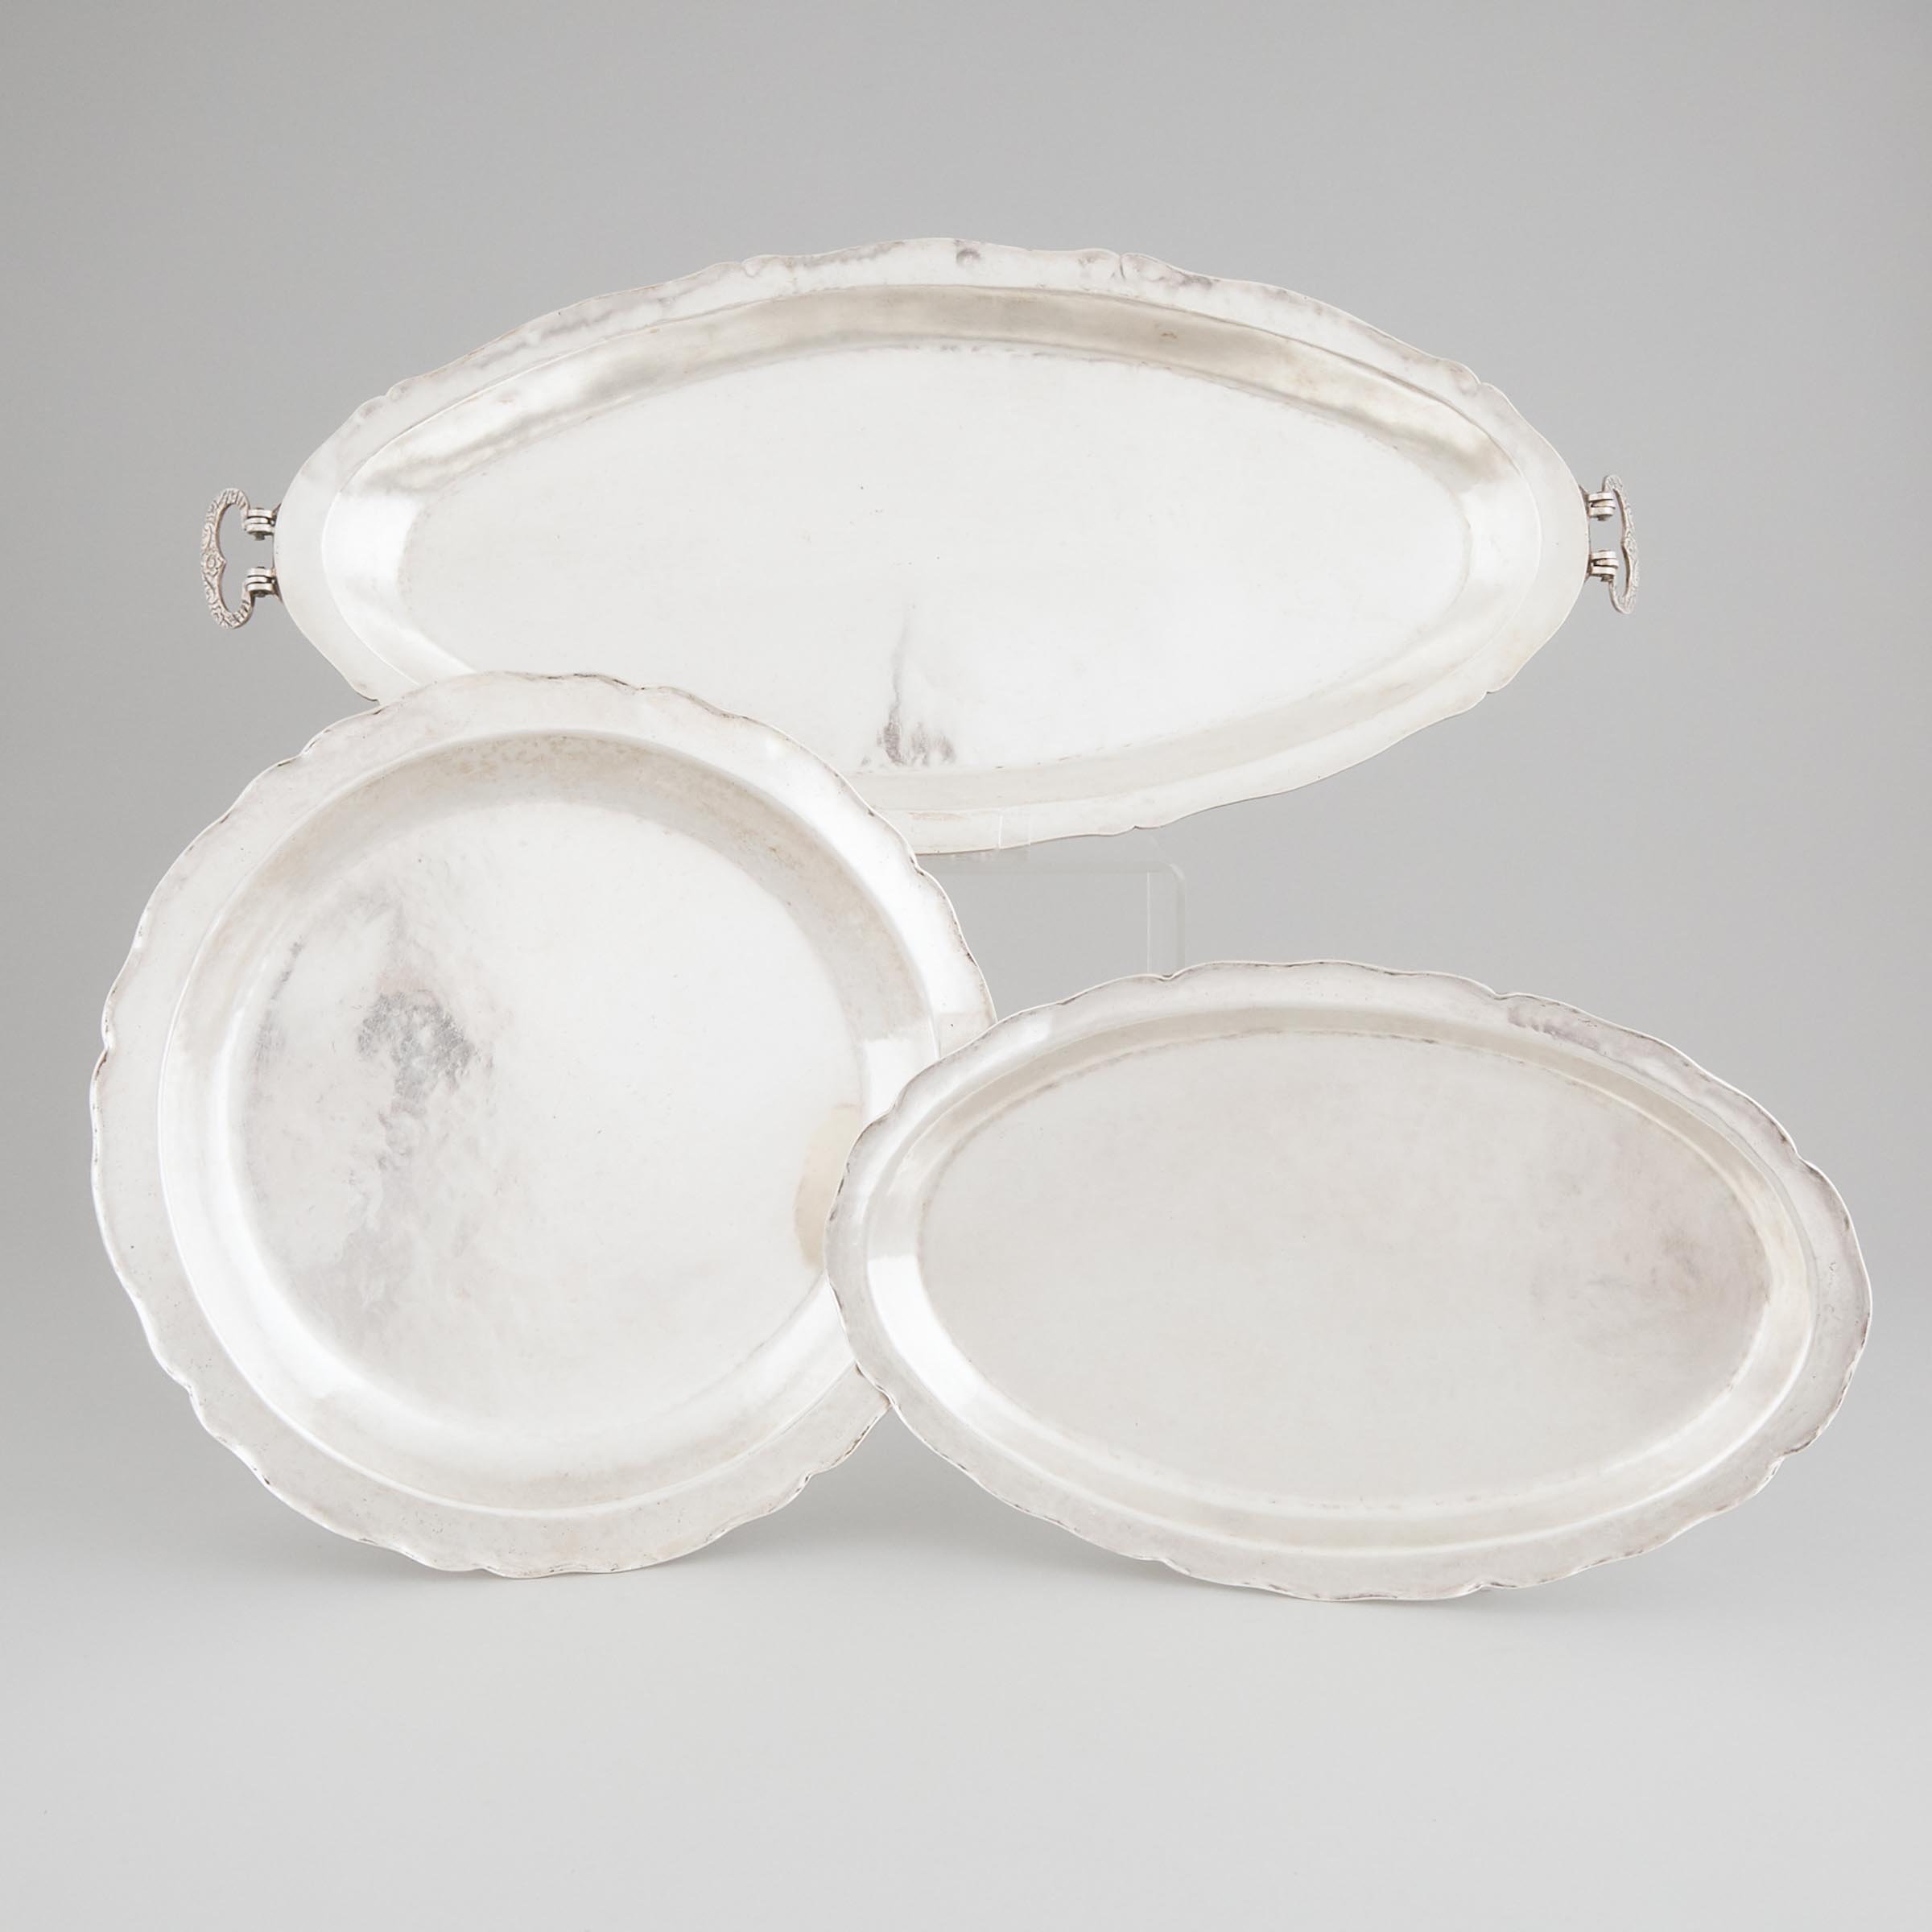 Peruvian Silver Two-Handled Fish Platter, Circular Dish and an Oval Dish, late 19th/20th century